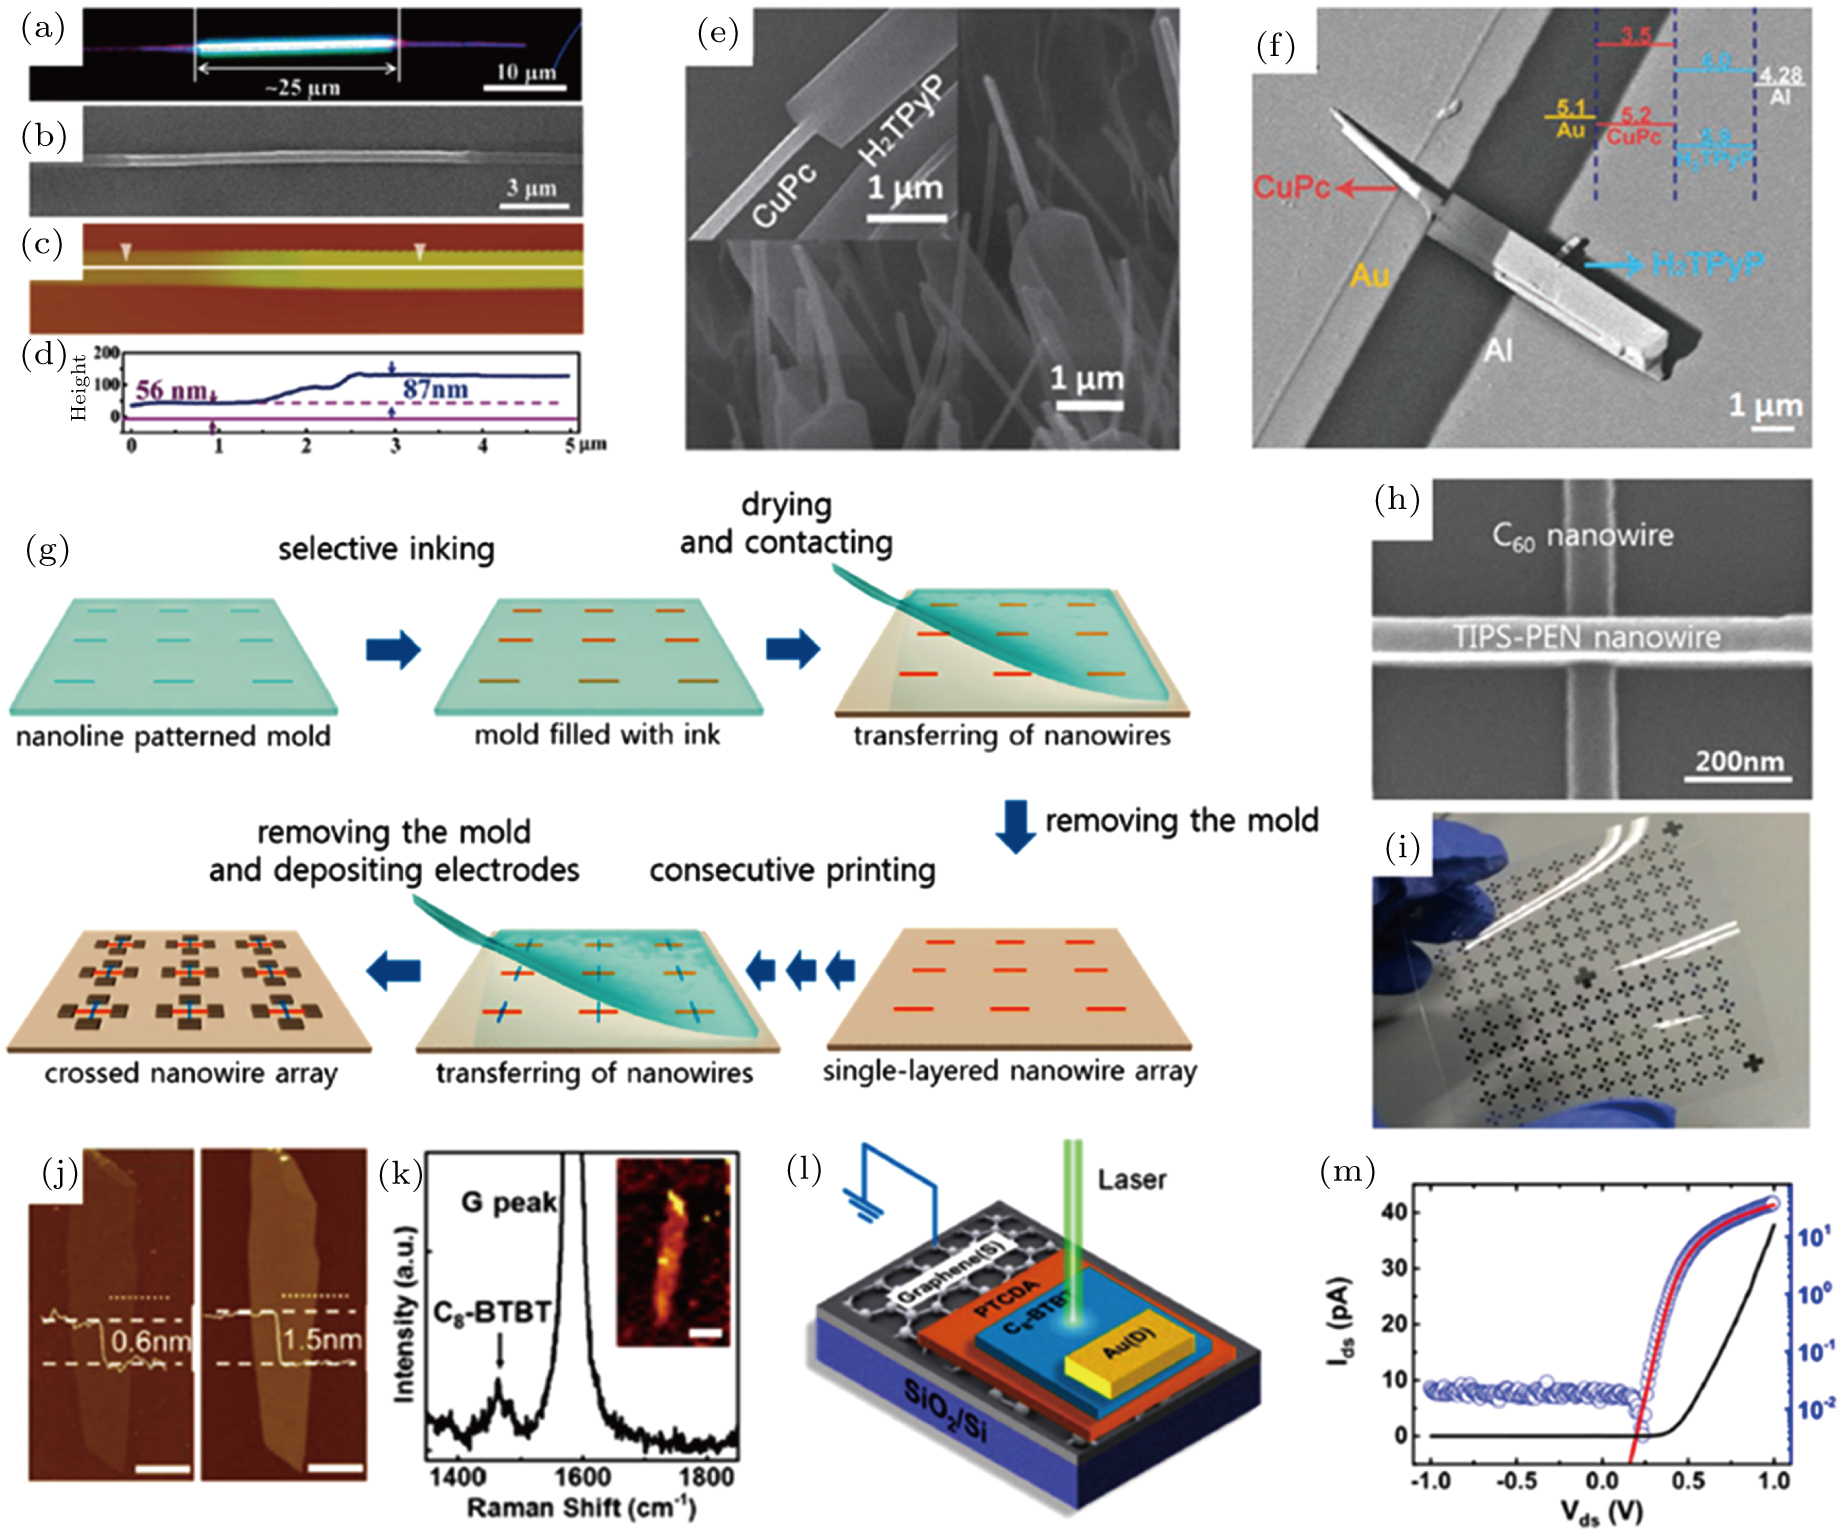 Photodetectors Based On Small Molecule Organic Semiconductor Crystals Xref Rid Cpb 28 3 fn1 Ref Type Fn Xref Fn Id Cpb 28 3 fn1 Label Label P Project Supported By The National Natural Science Foundation Of China Grant Nos